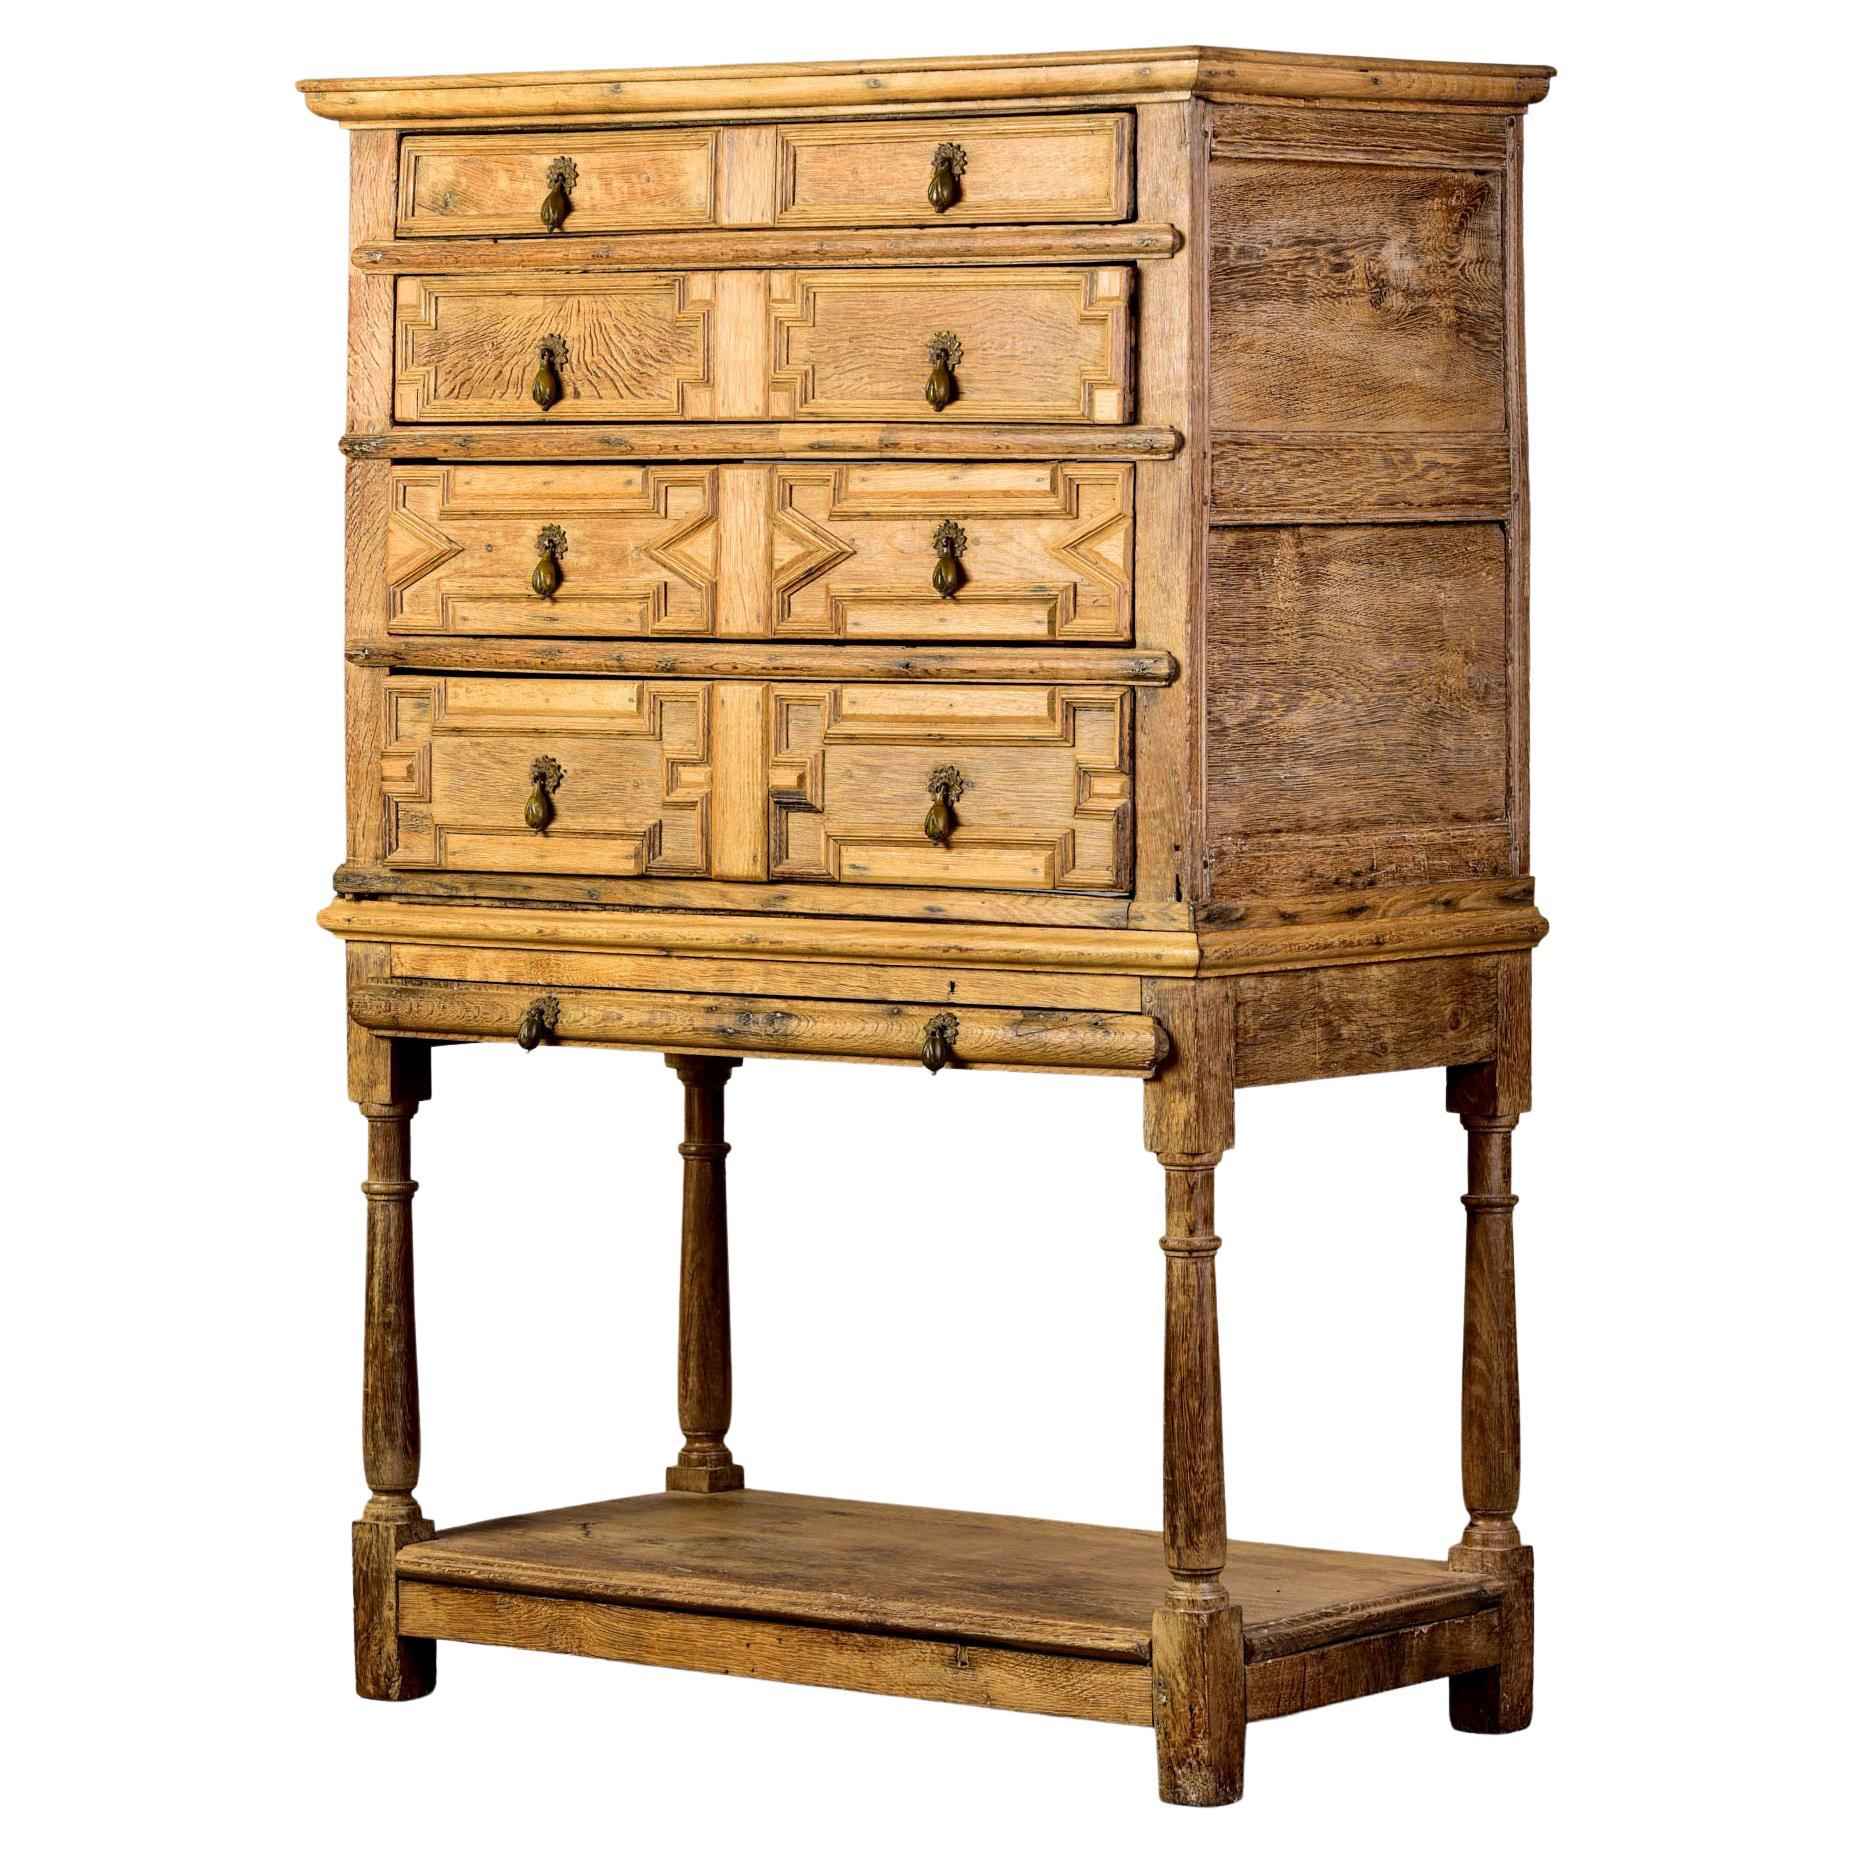 18th Century Pale Oak English Chest of Drawers on Stand